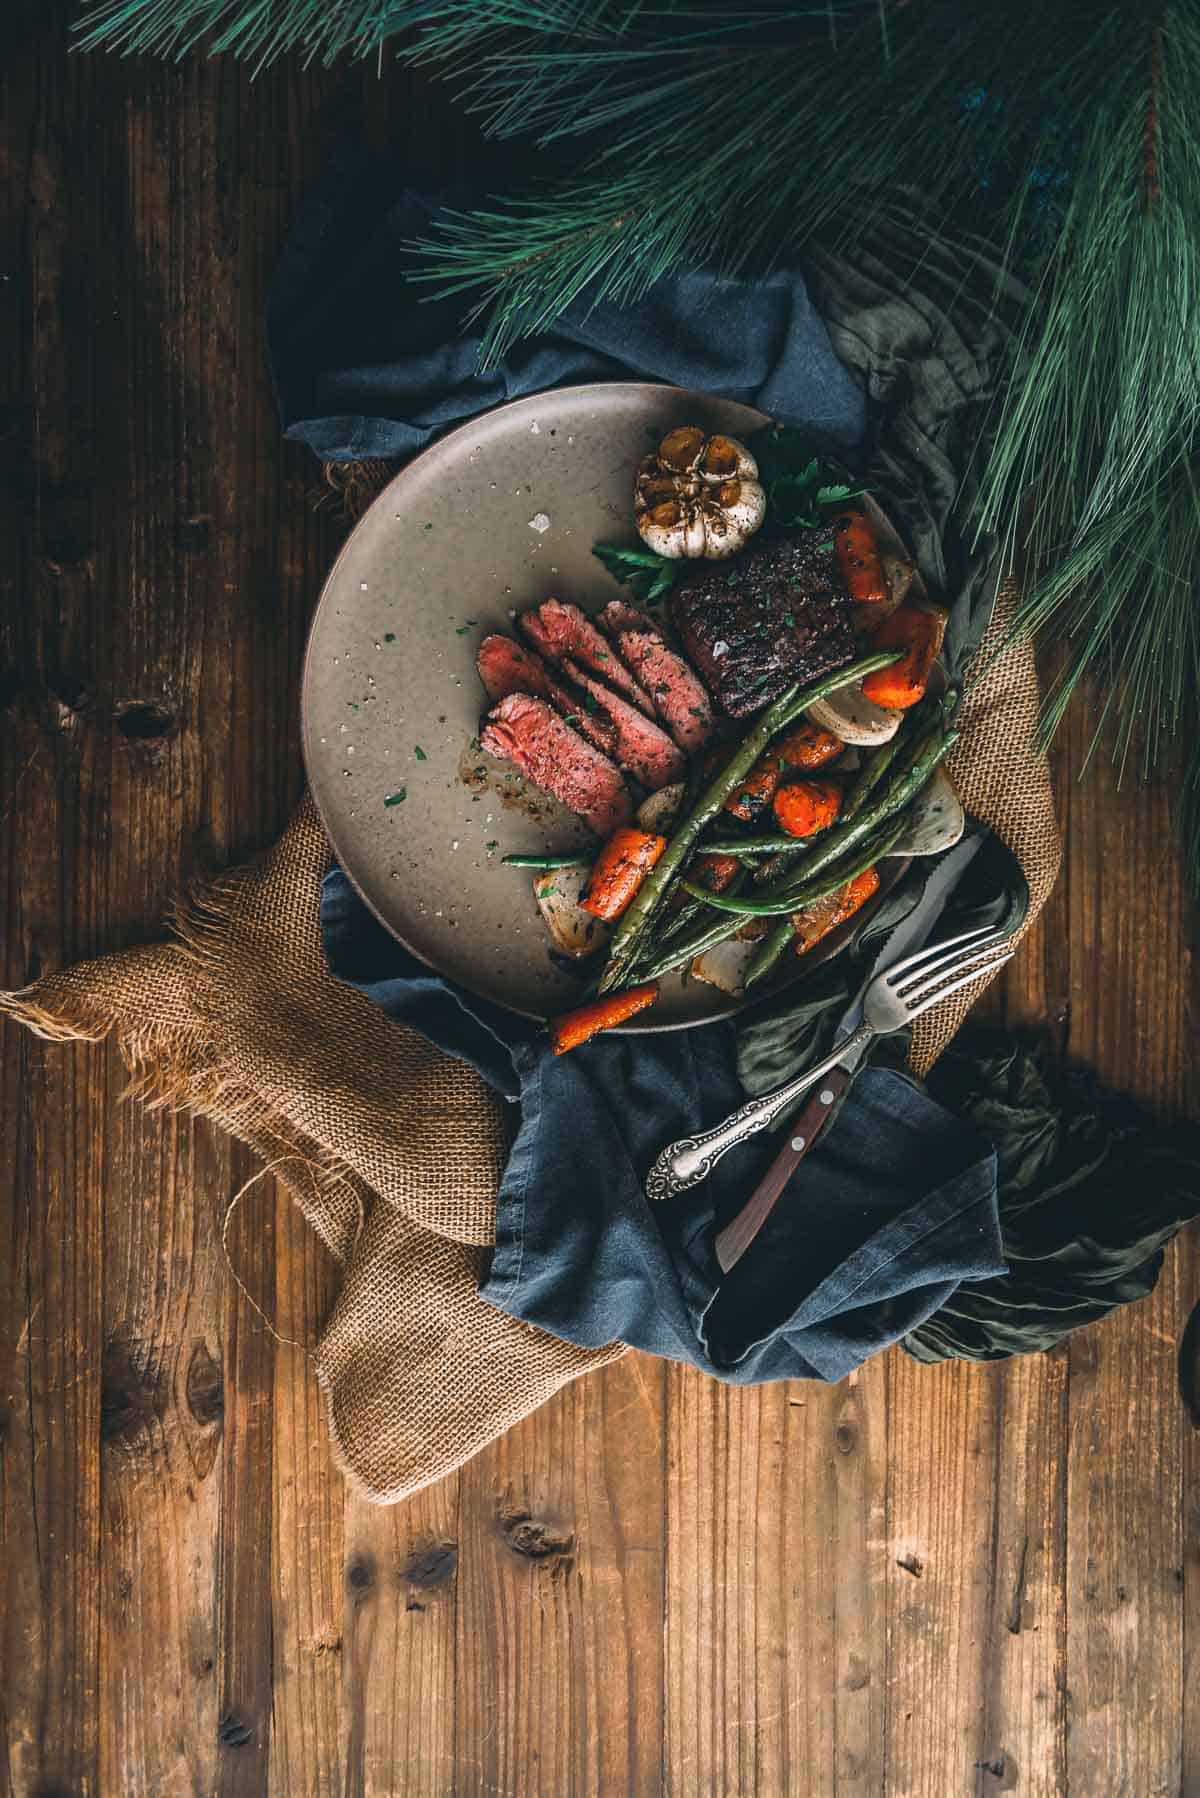 A plate with steak and vegetables on a wooden table.